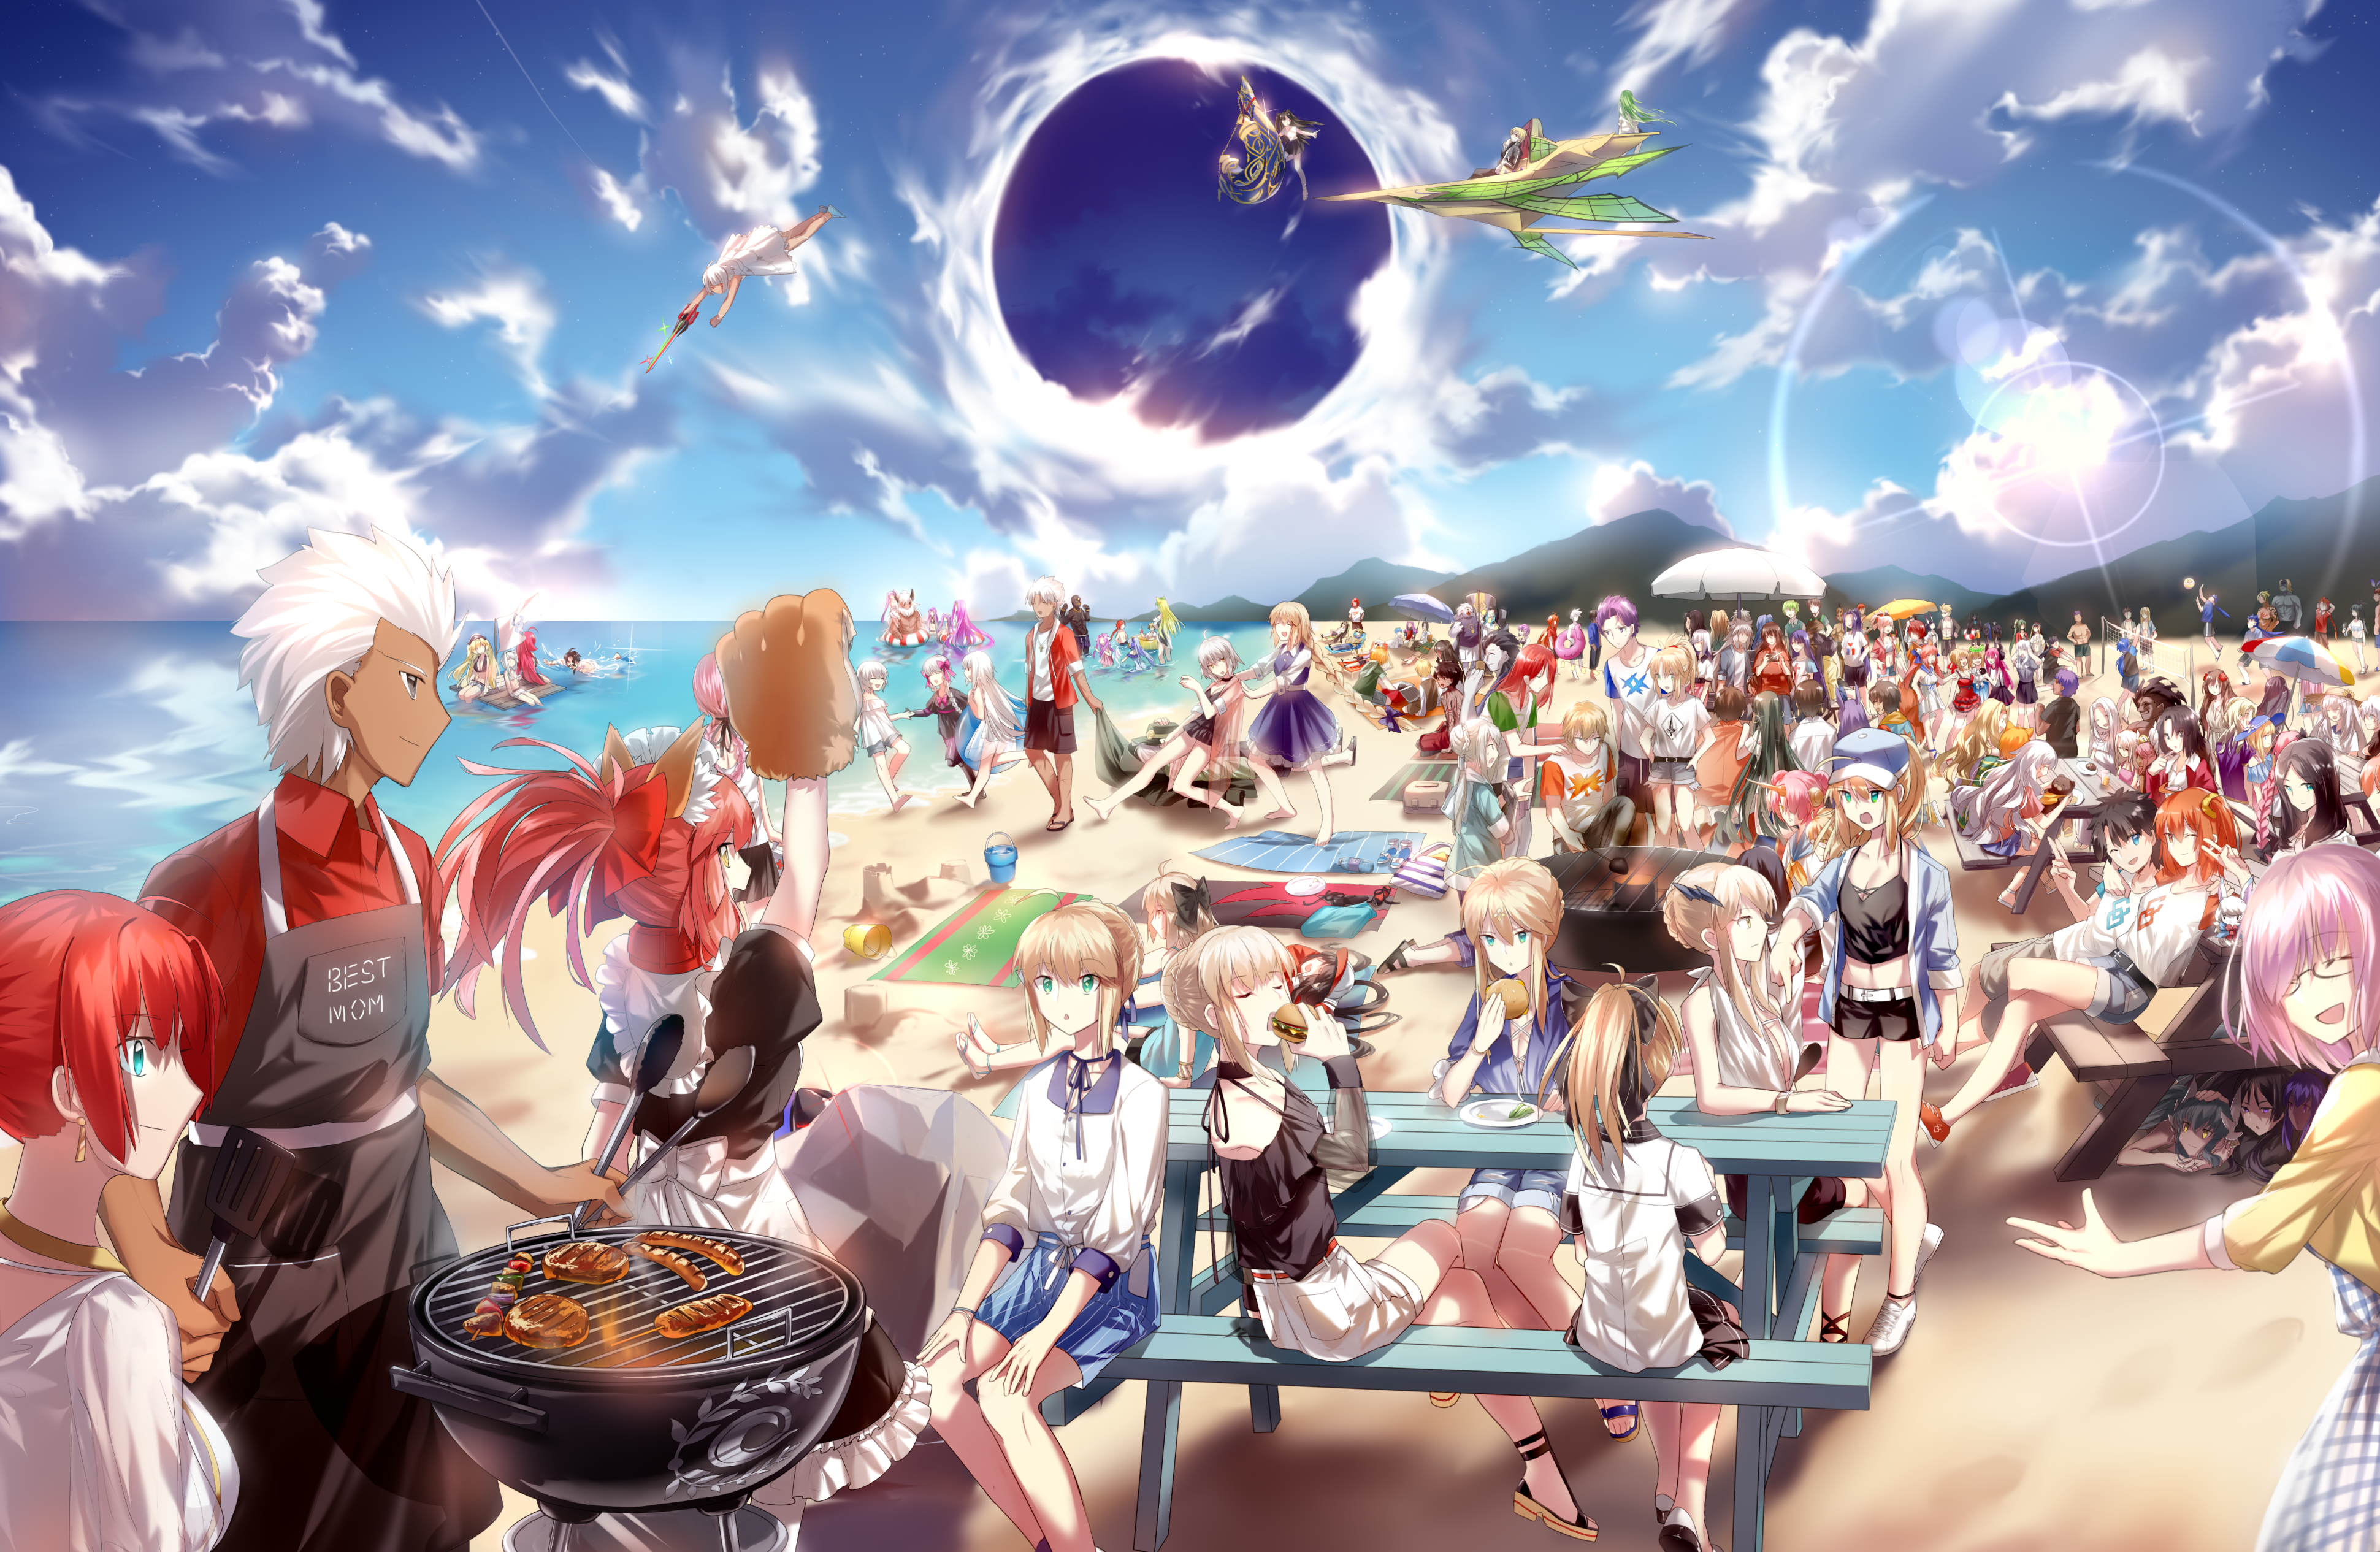 Fate Series Fate Grand Order Anime Sky Anime Girls Anime Boys Group Of Men Barbecue Clouds 3881x2531